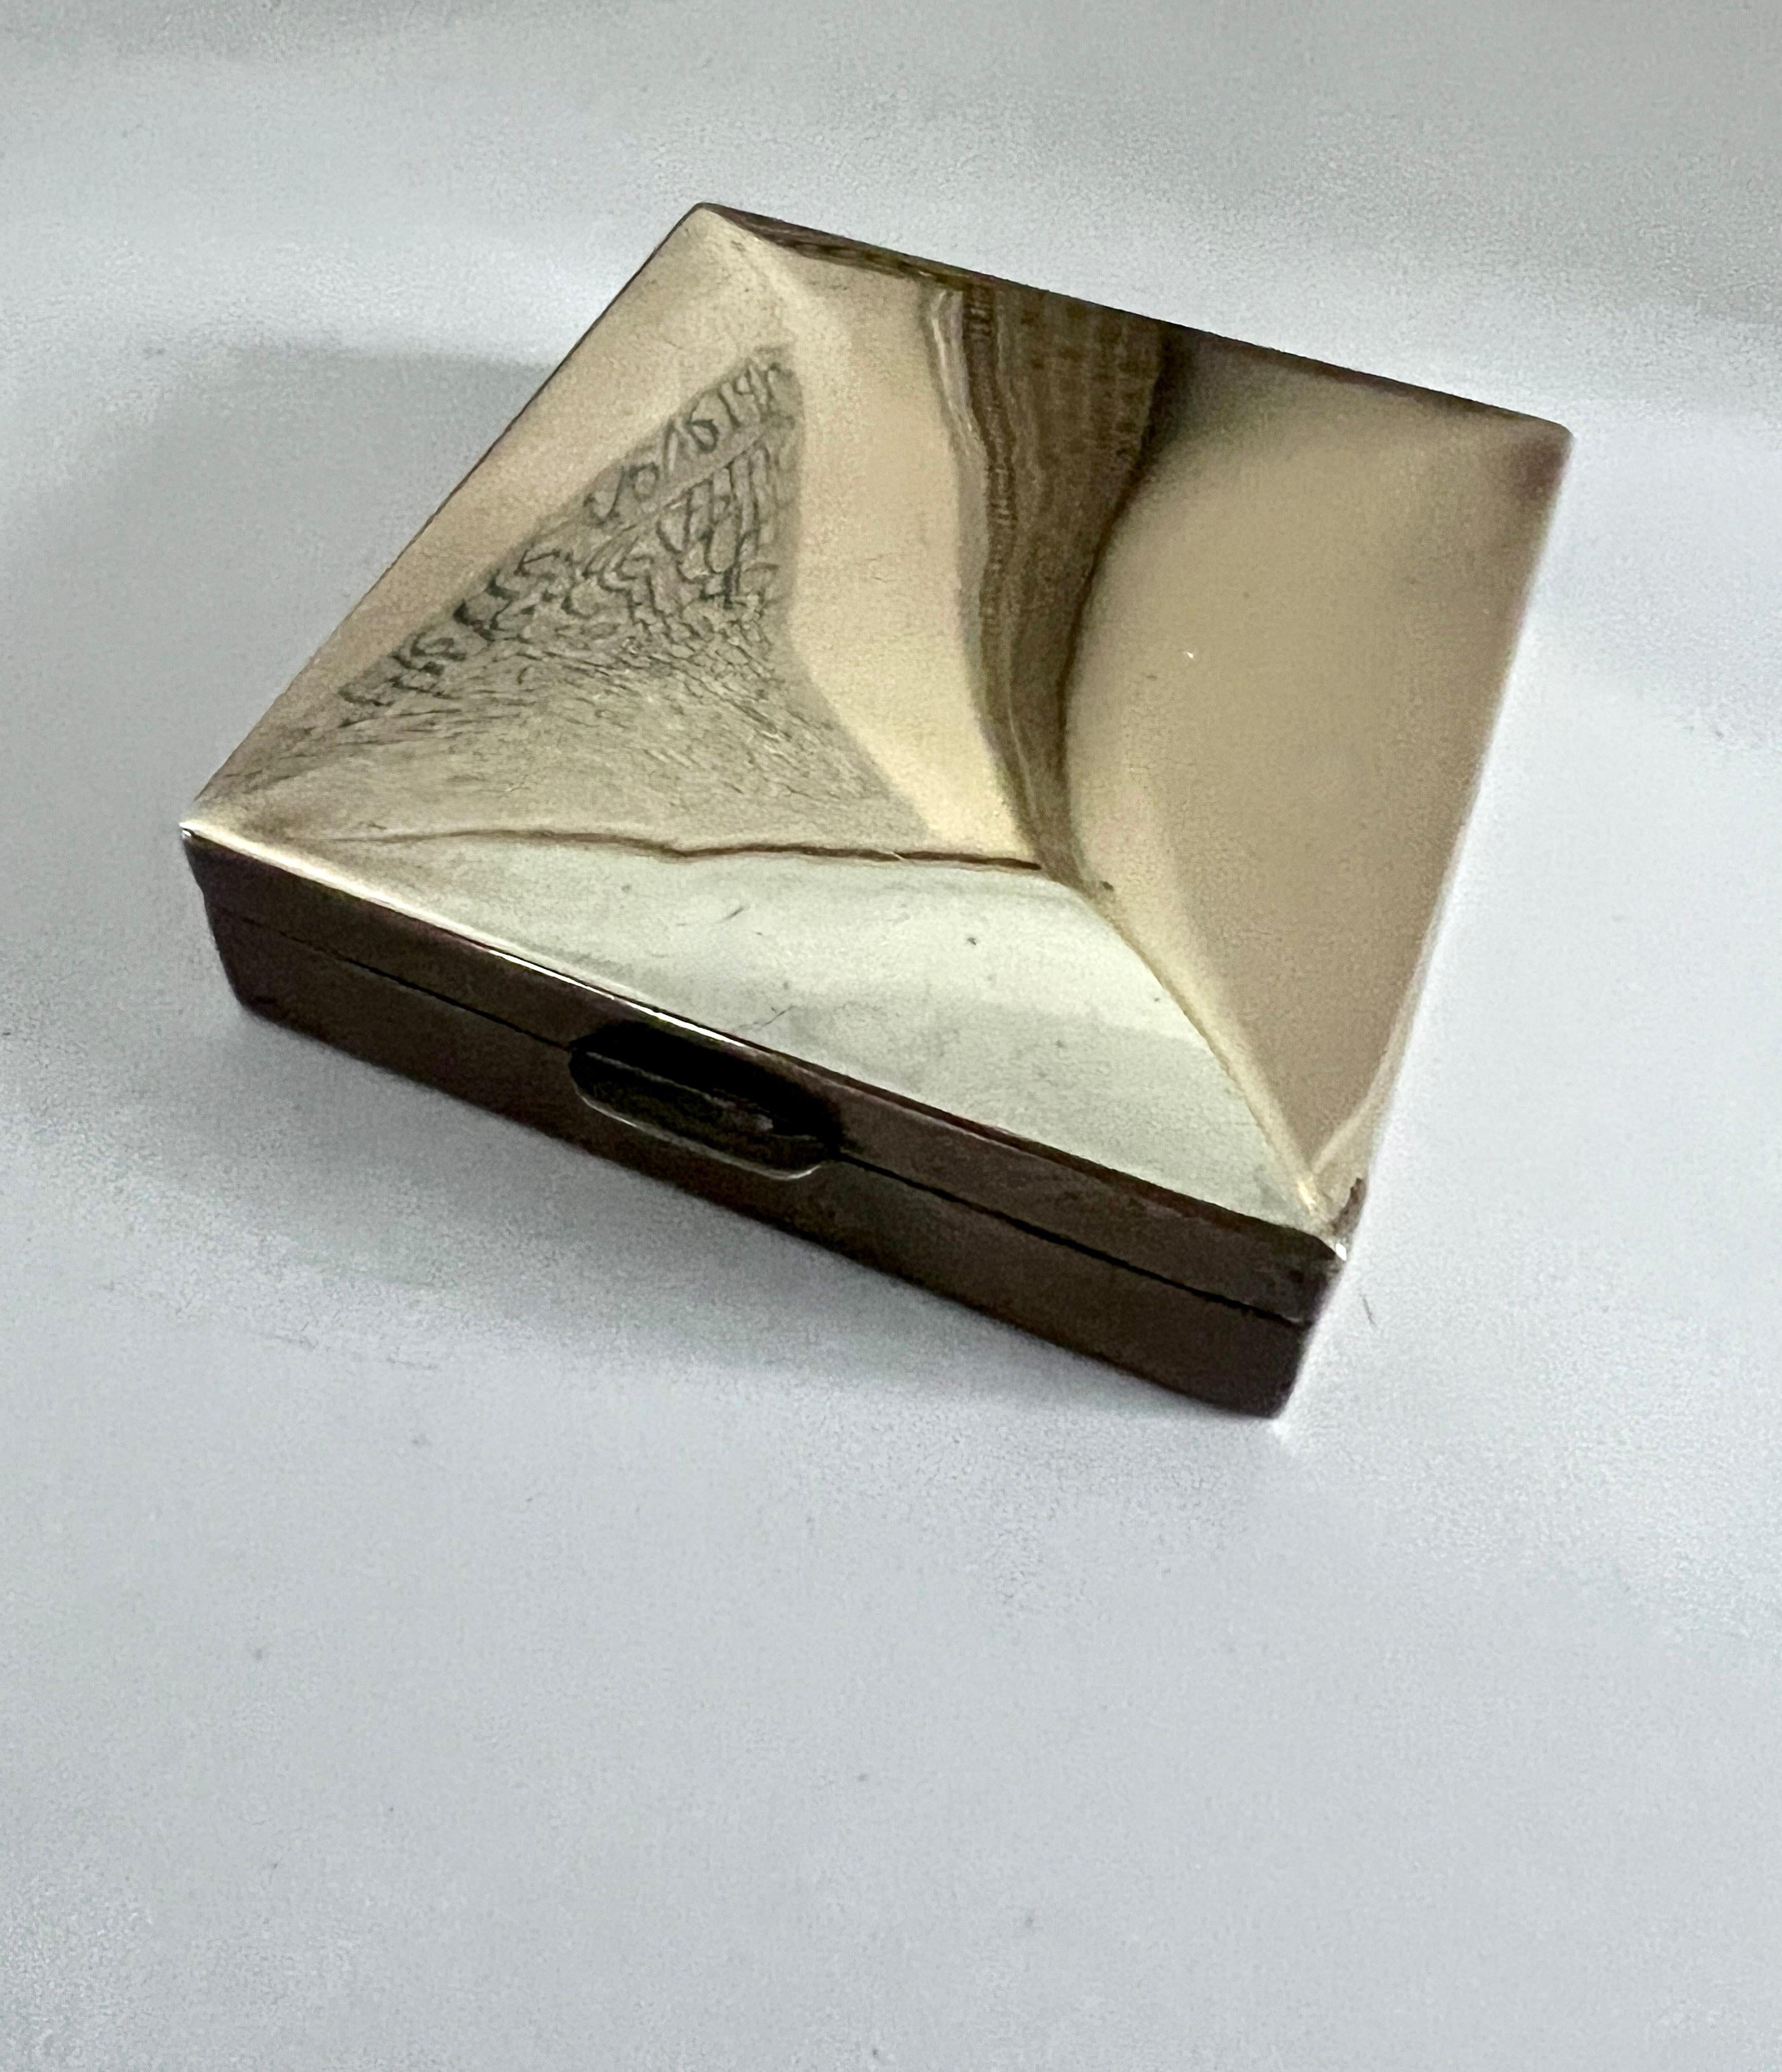 A square brass box with a slightly raised top.  The piece is lined with wood and green for office or work station supplies.  Also, a handsome decorative box on the cocktail table holding small things, from candies to 420.

A very nice box, in good